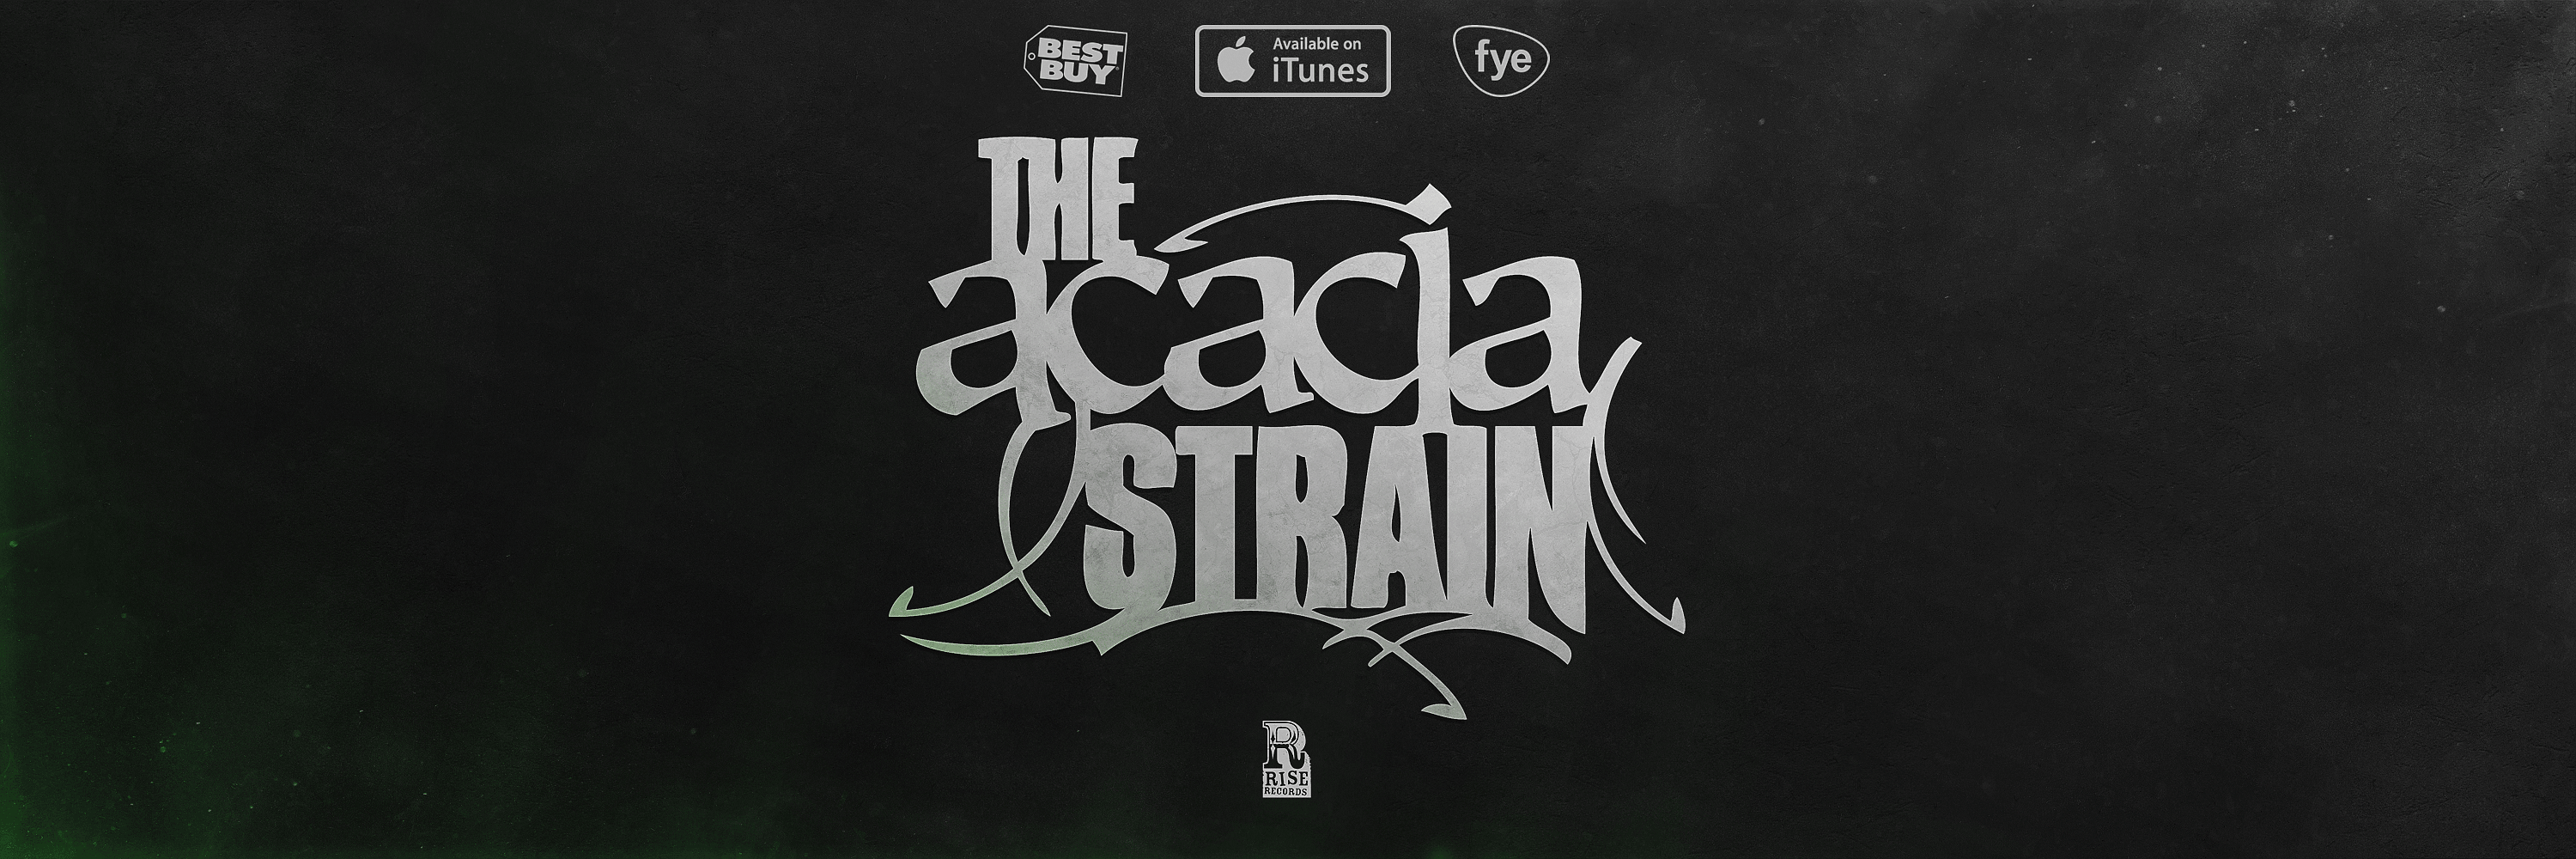 The Acacia Strain Header By Strkdesigns